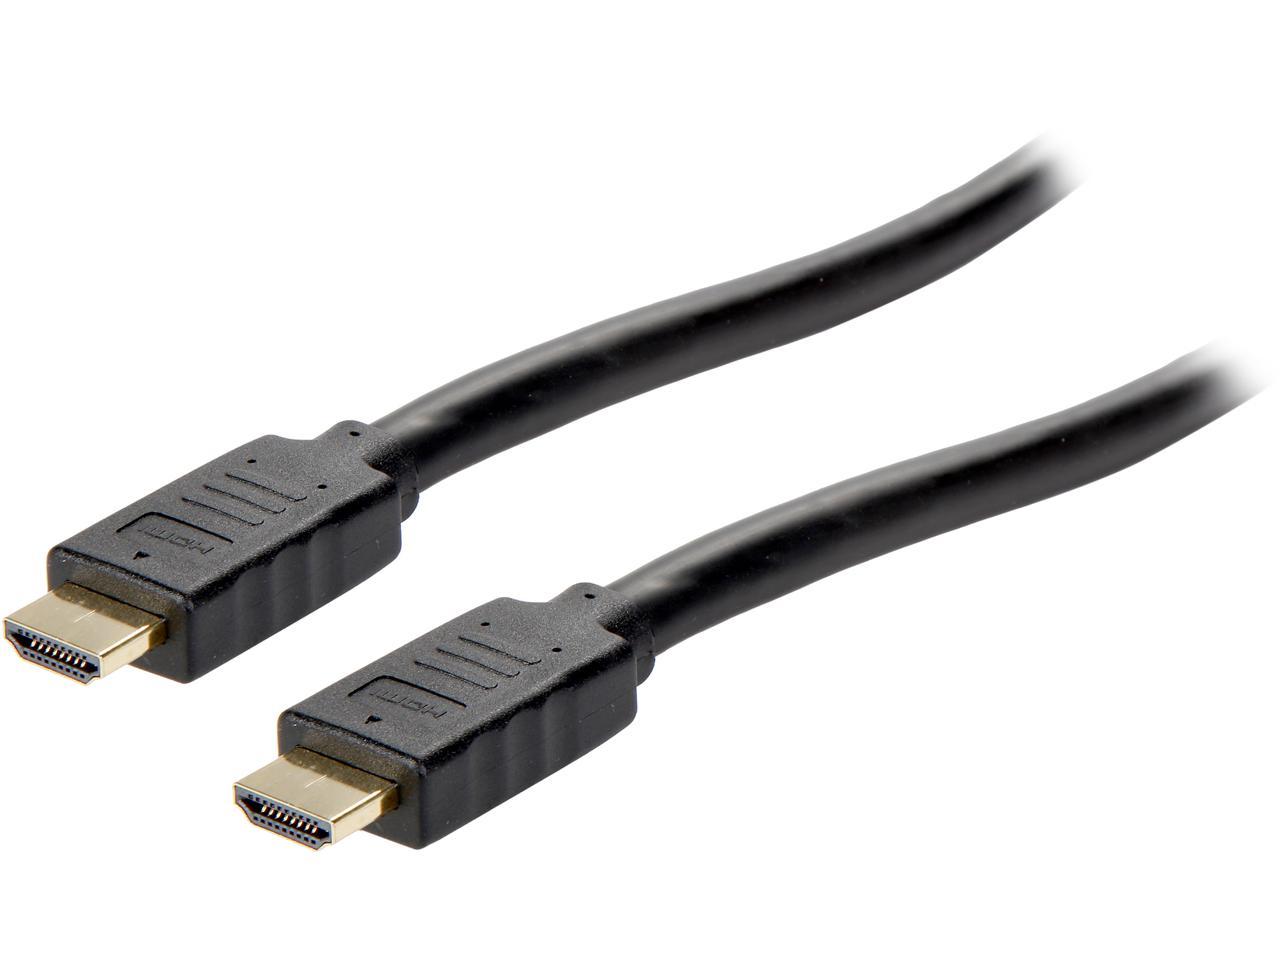 StarTech.com HDMM7MP 4K HDMI Cable - with Ethernet - 7m / 23 ft HDMI Cable - 4K 60Hz - High Speed HDMI Cable 2.0 - HDMI Cord - Long HDMI Cable